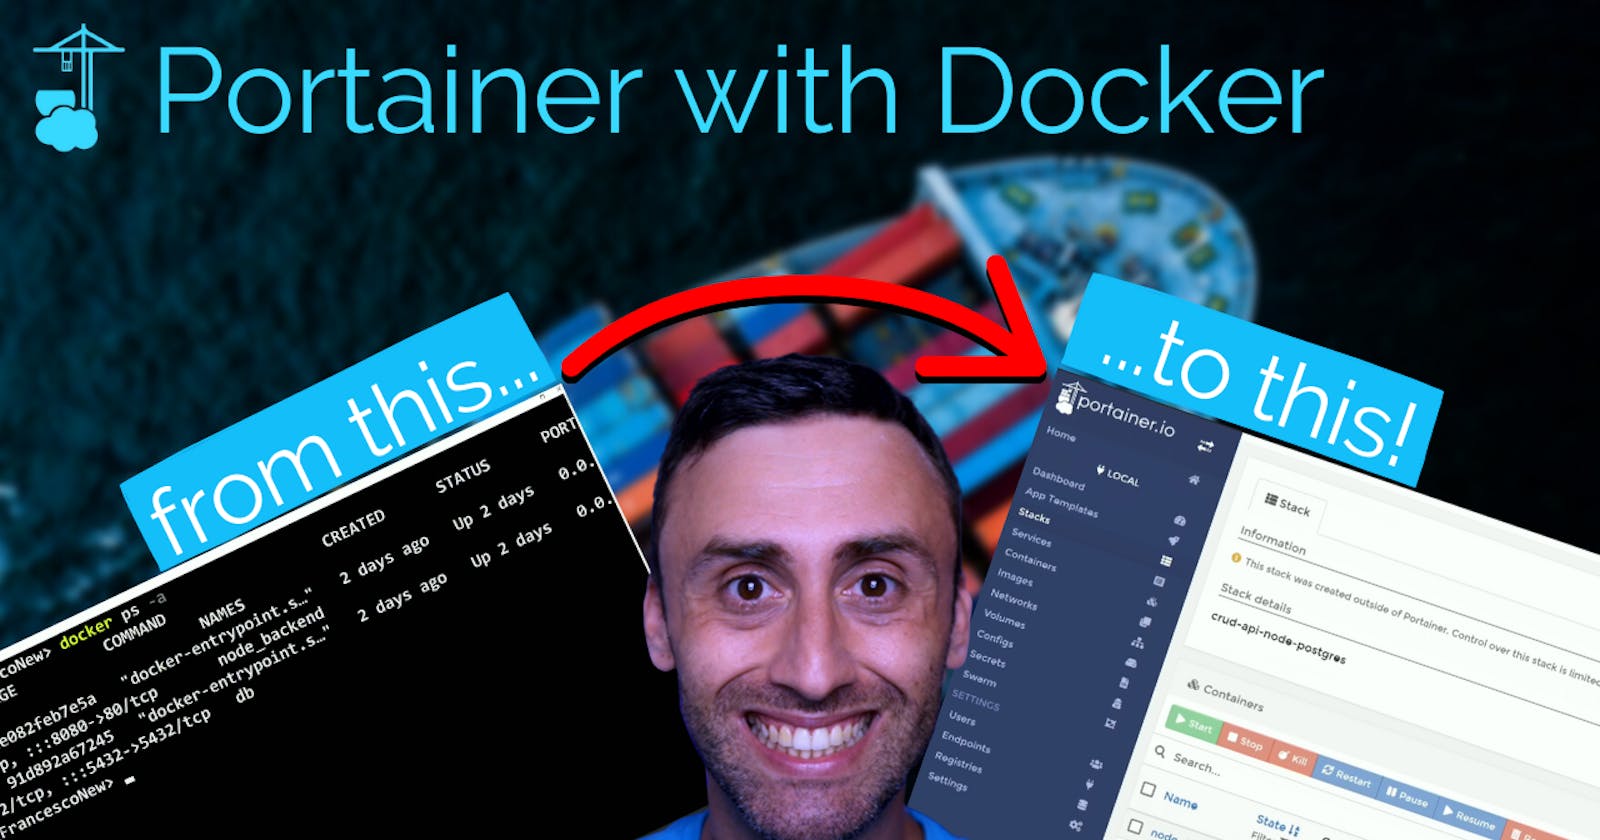 How to install Portainer with Docker